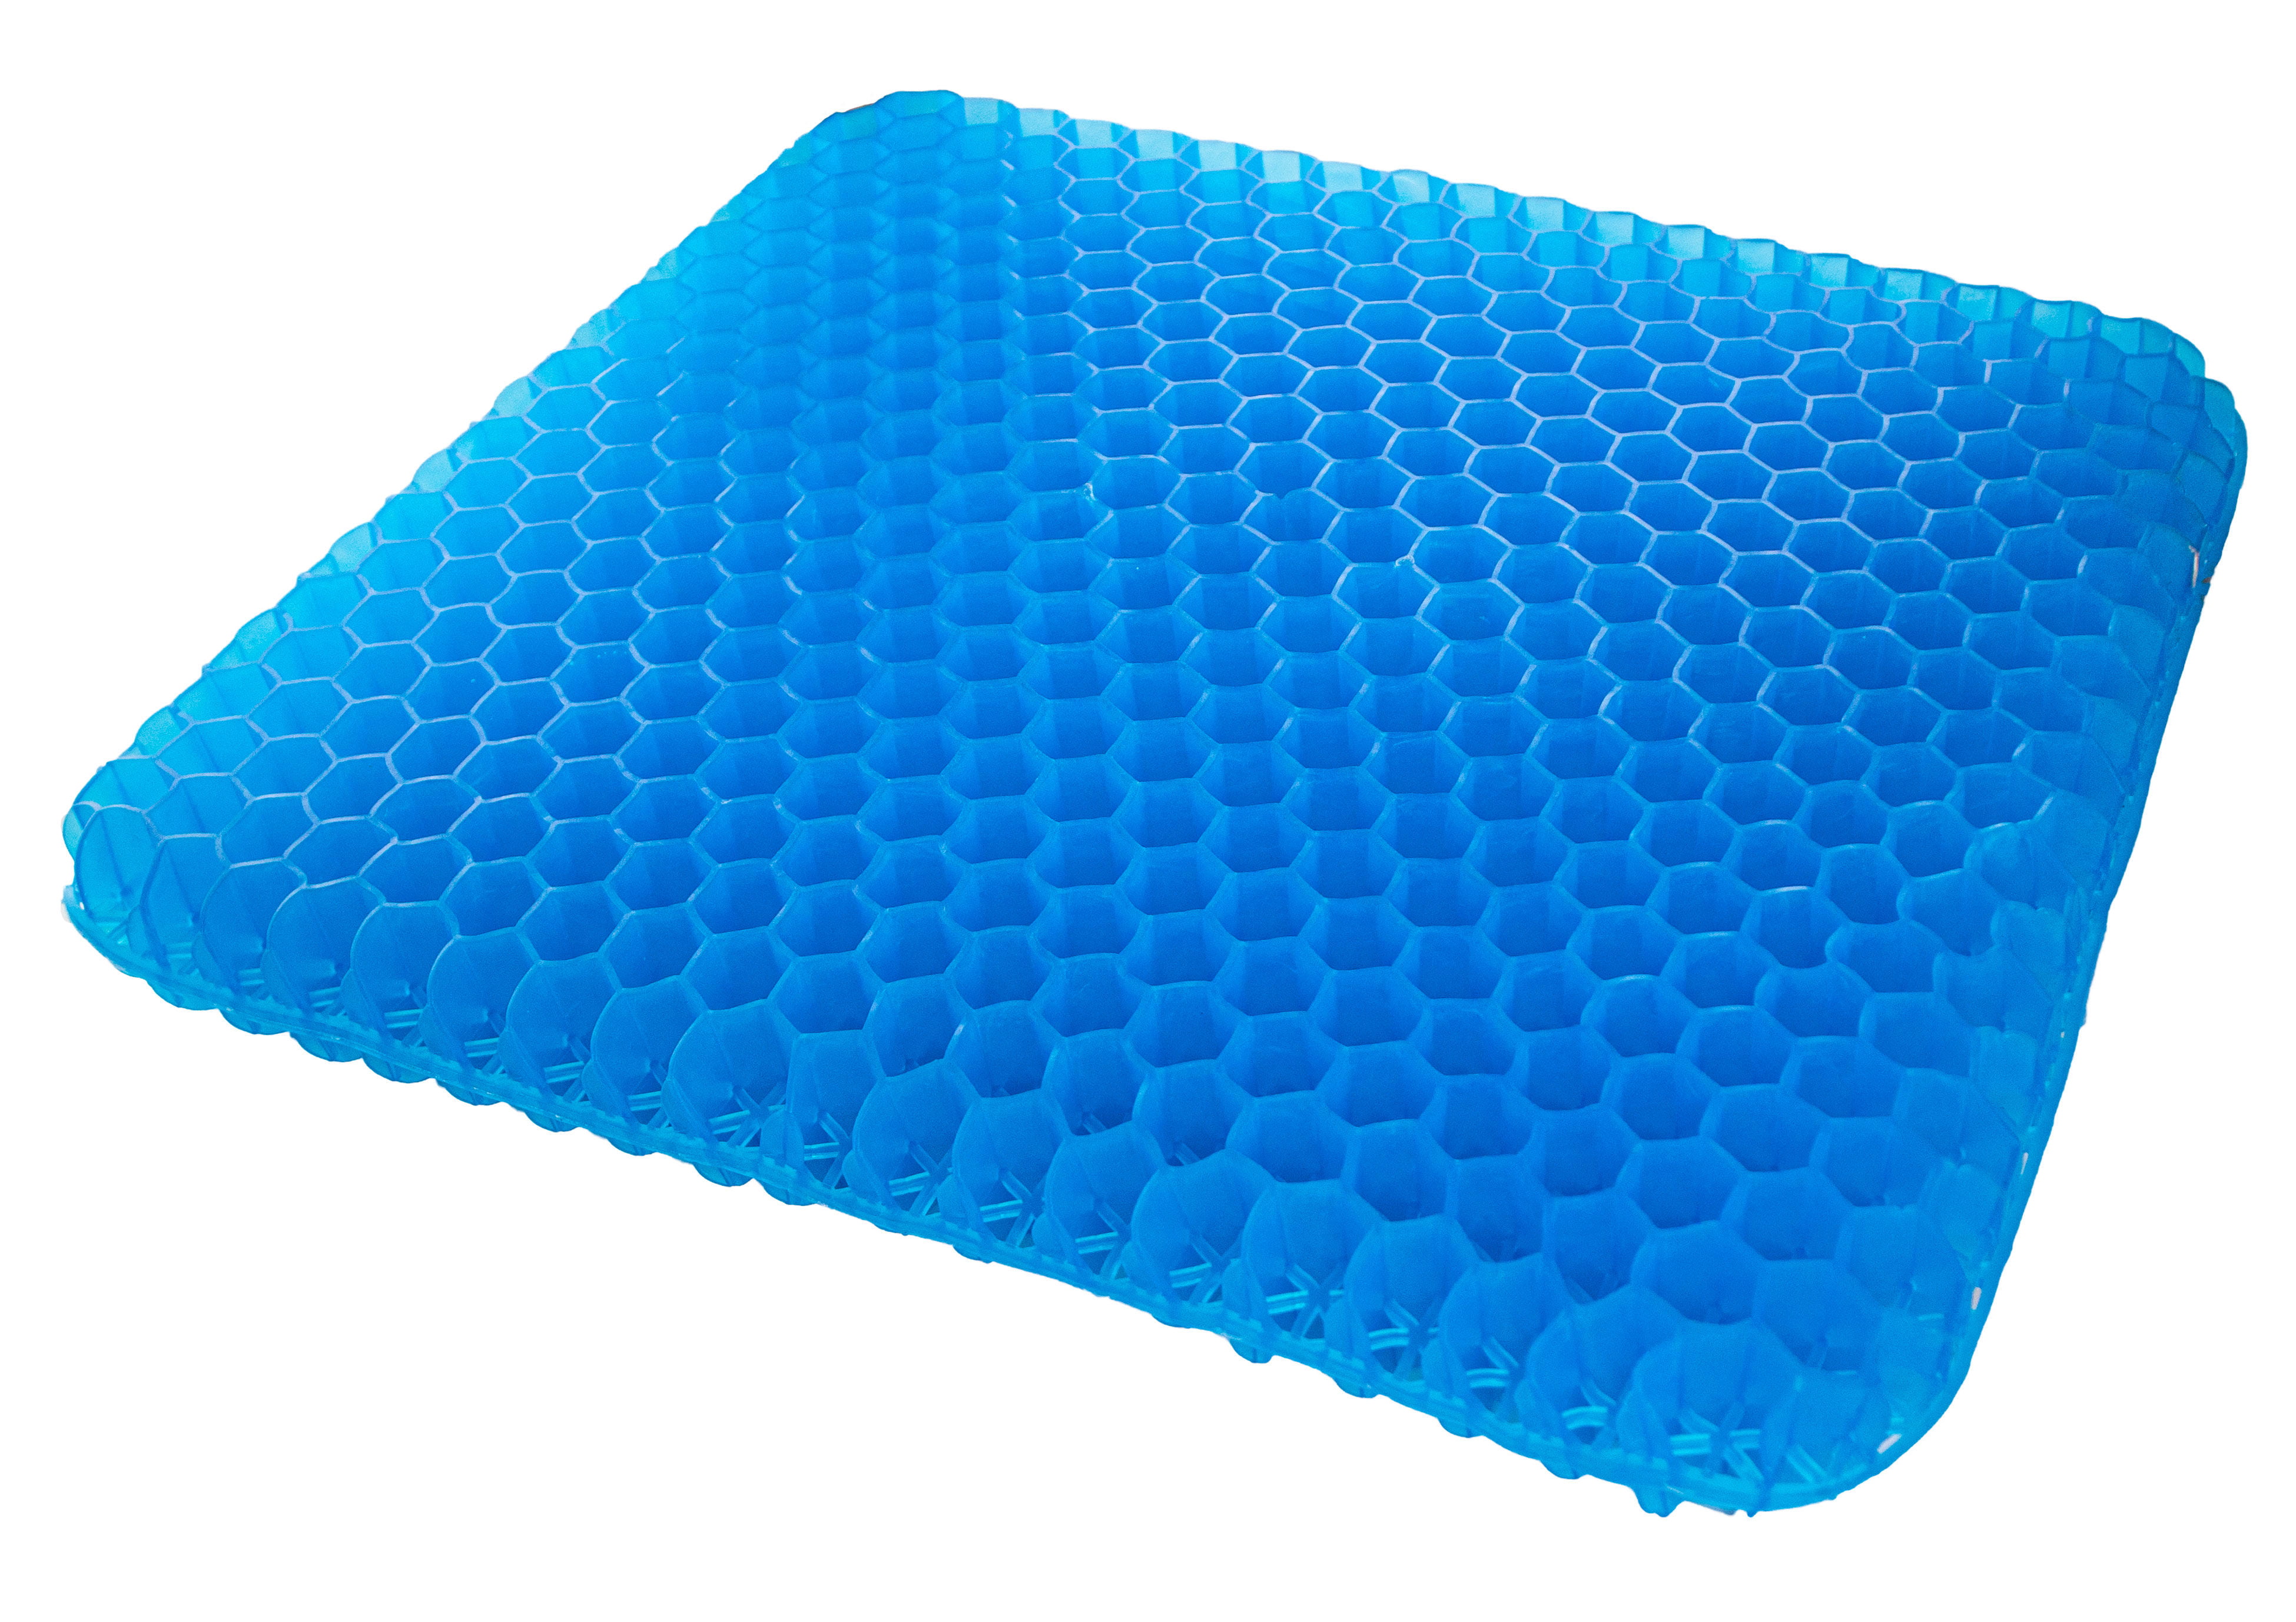 Gel Seat Cushion for Long Sitting - Portable Gel Cushion with Ergonomic  Honeycomb Design - Large Size 16 x 13 x 1.75 Gel Seat Cushions for  Pressure